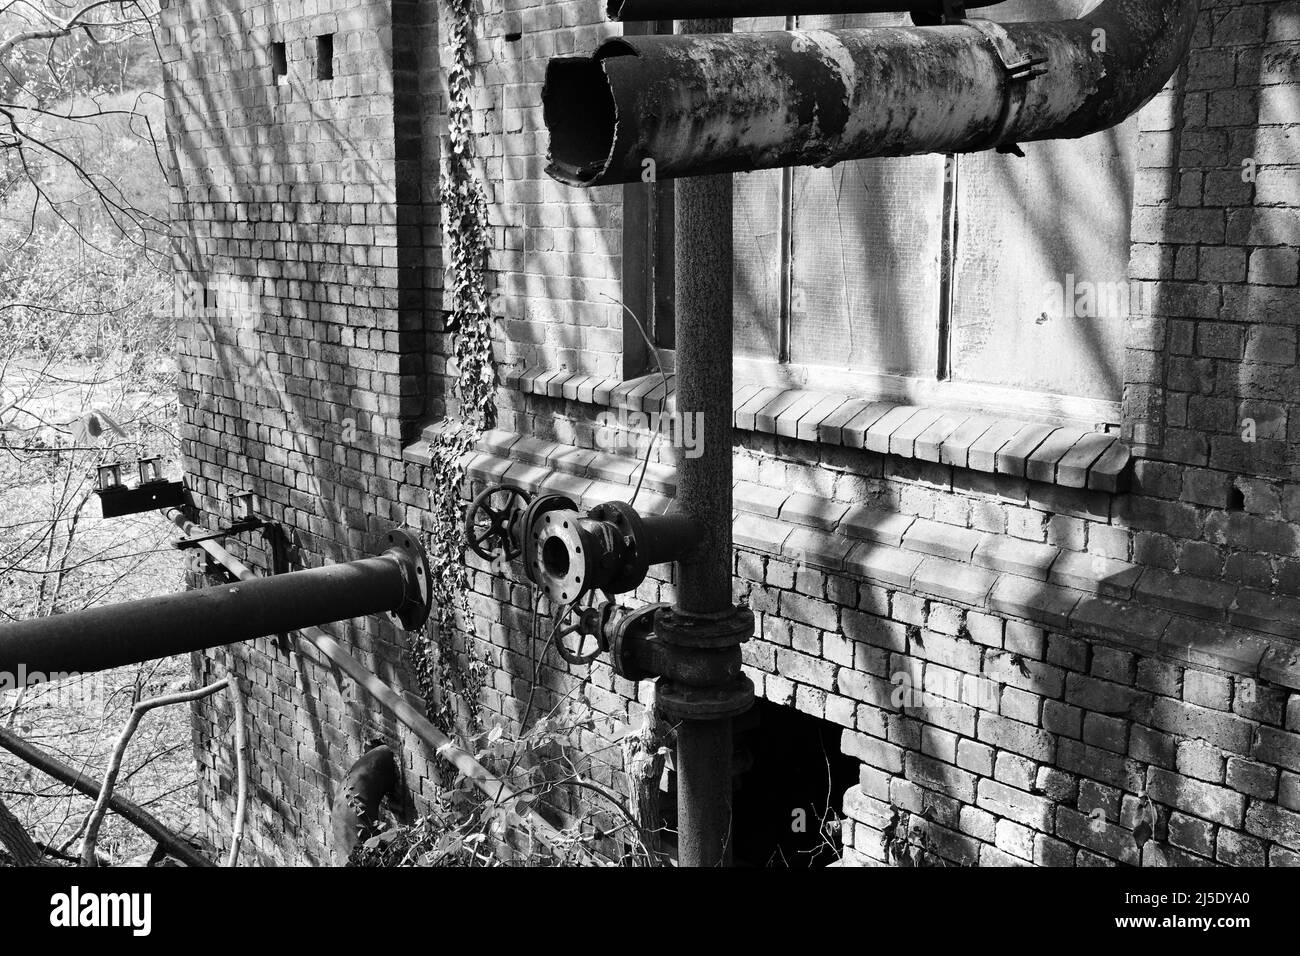 Cauldon Canal derelict factory Froghall Wharf Stock Photo